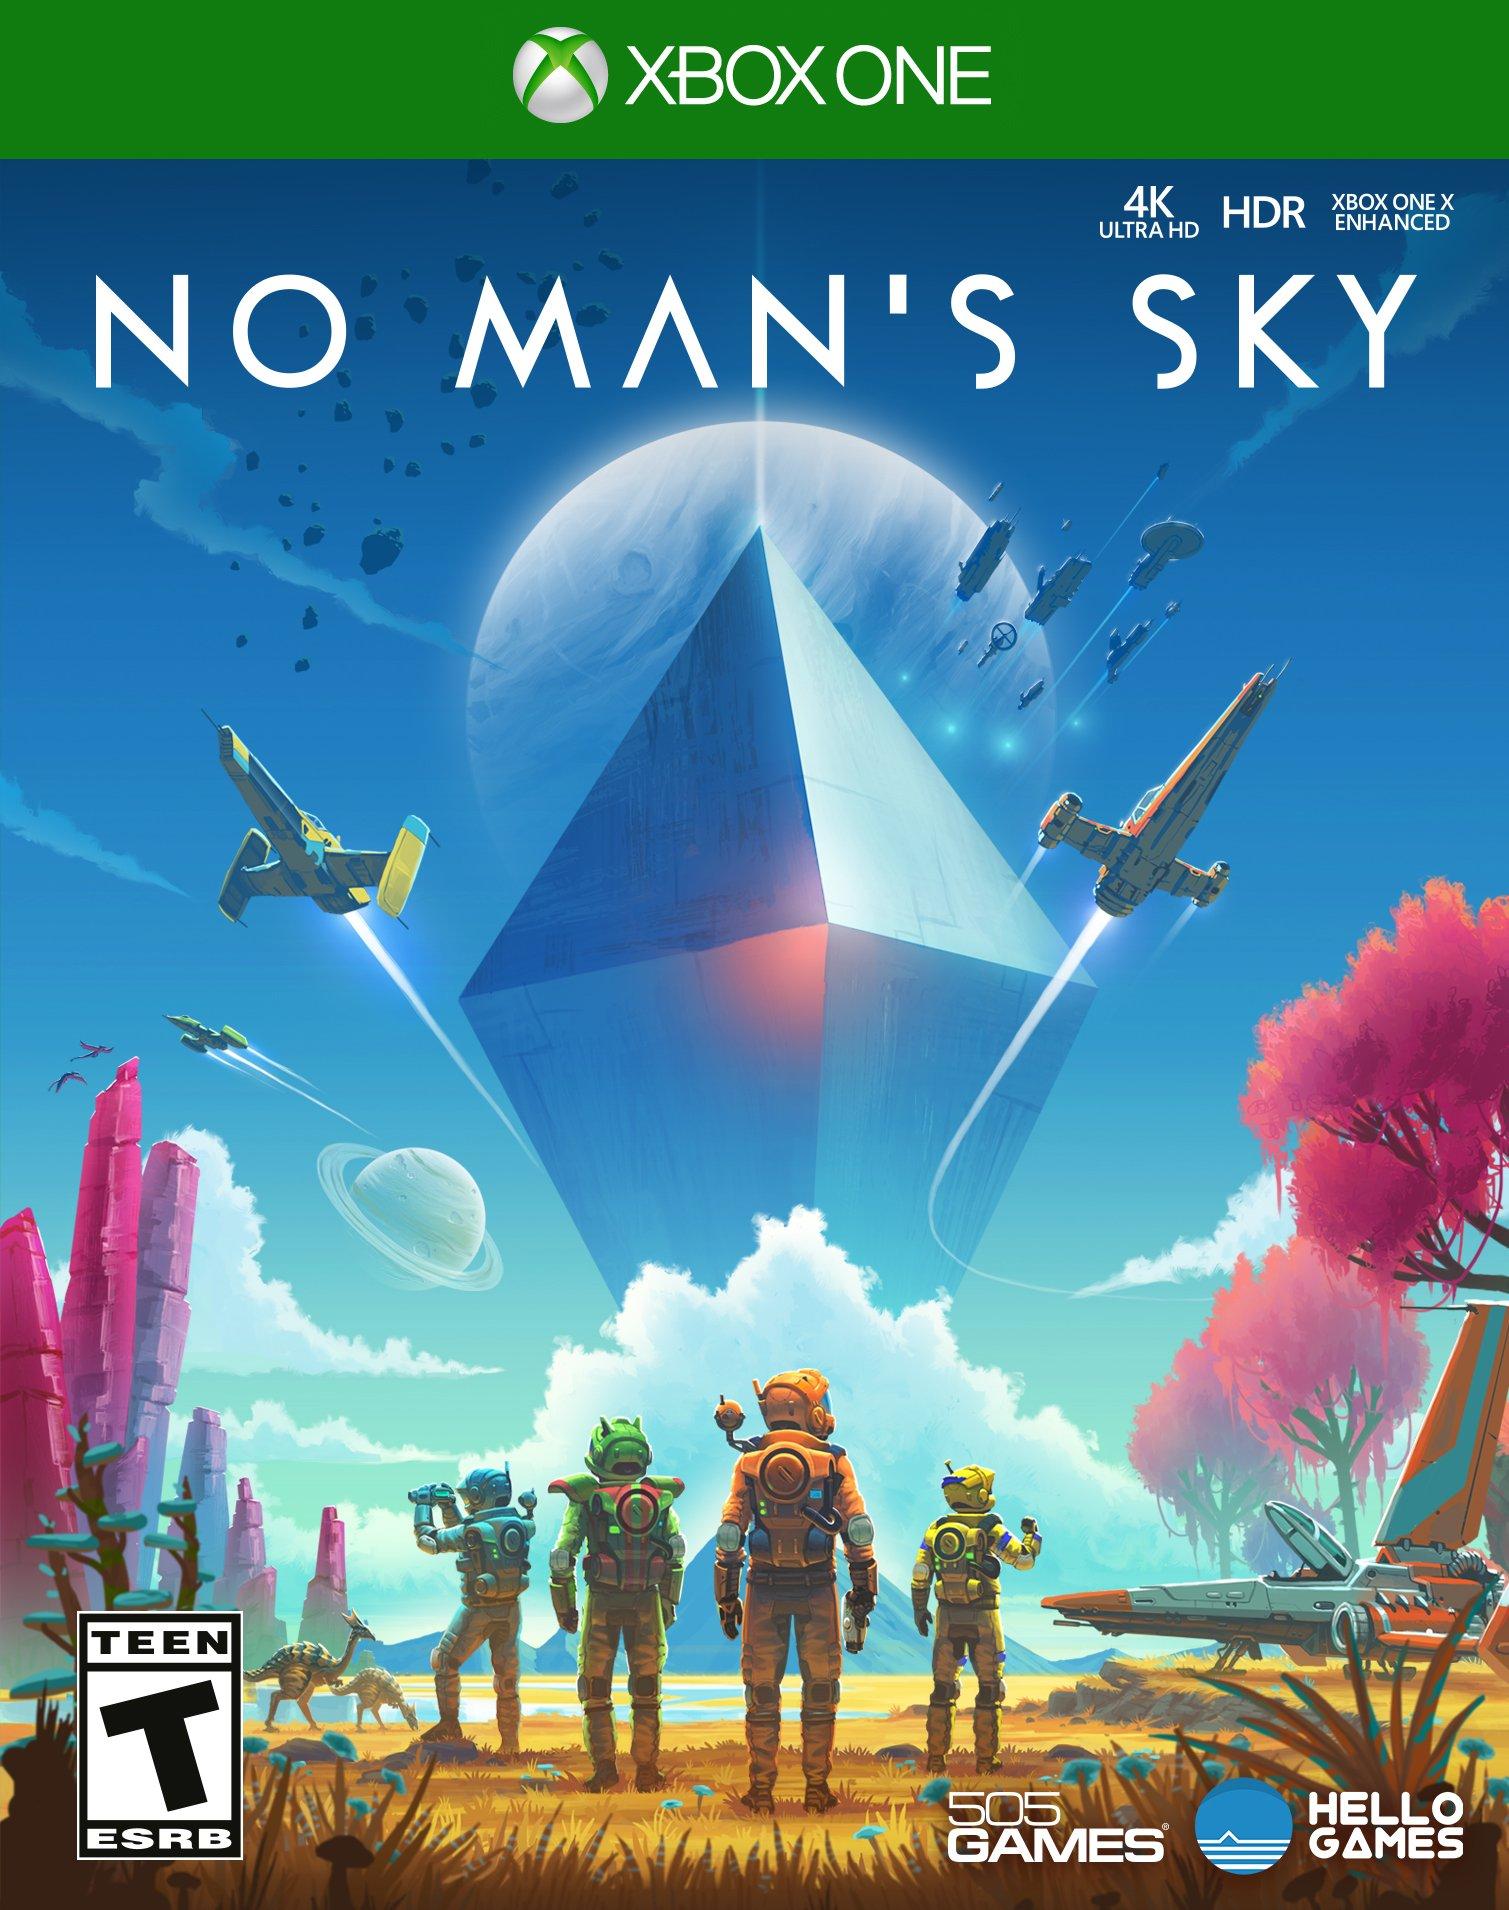 can you get no man's sky on nintendo switch